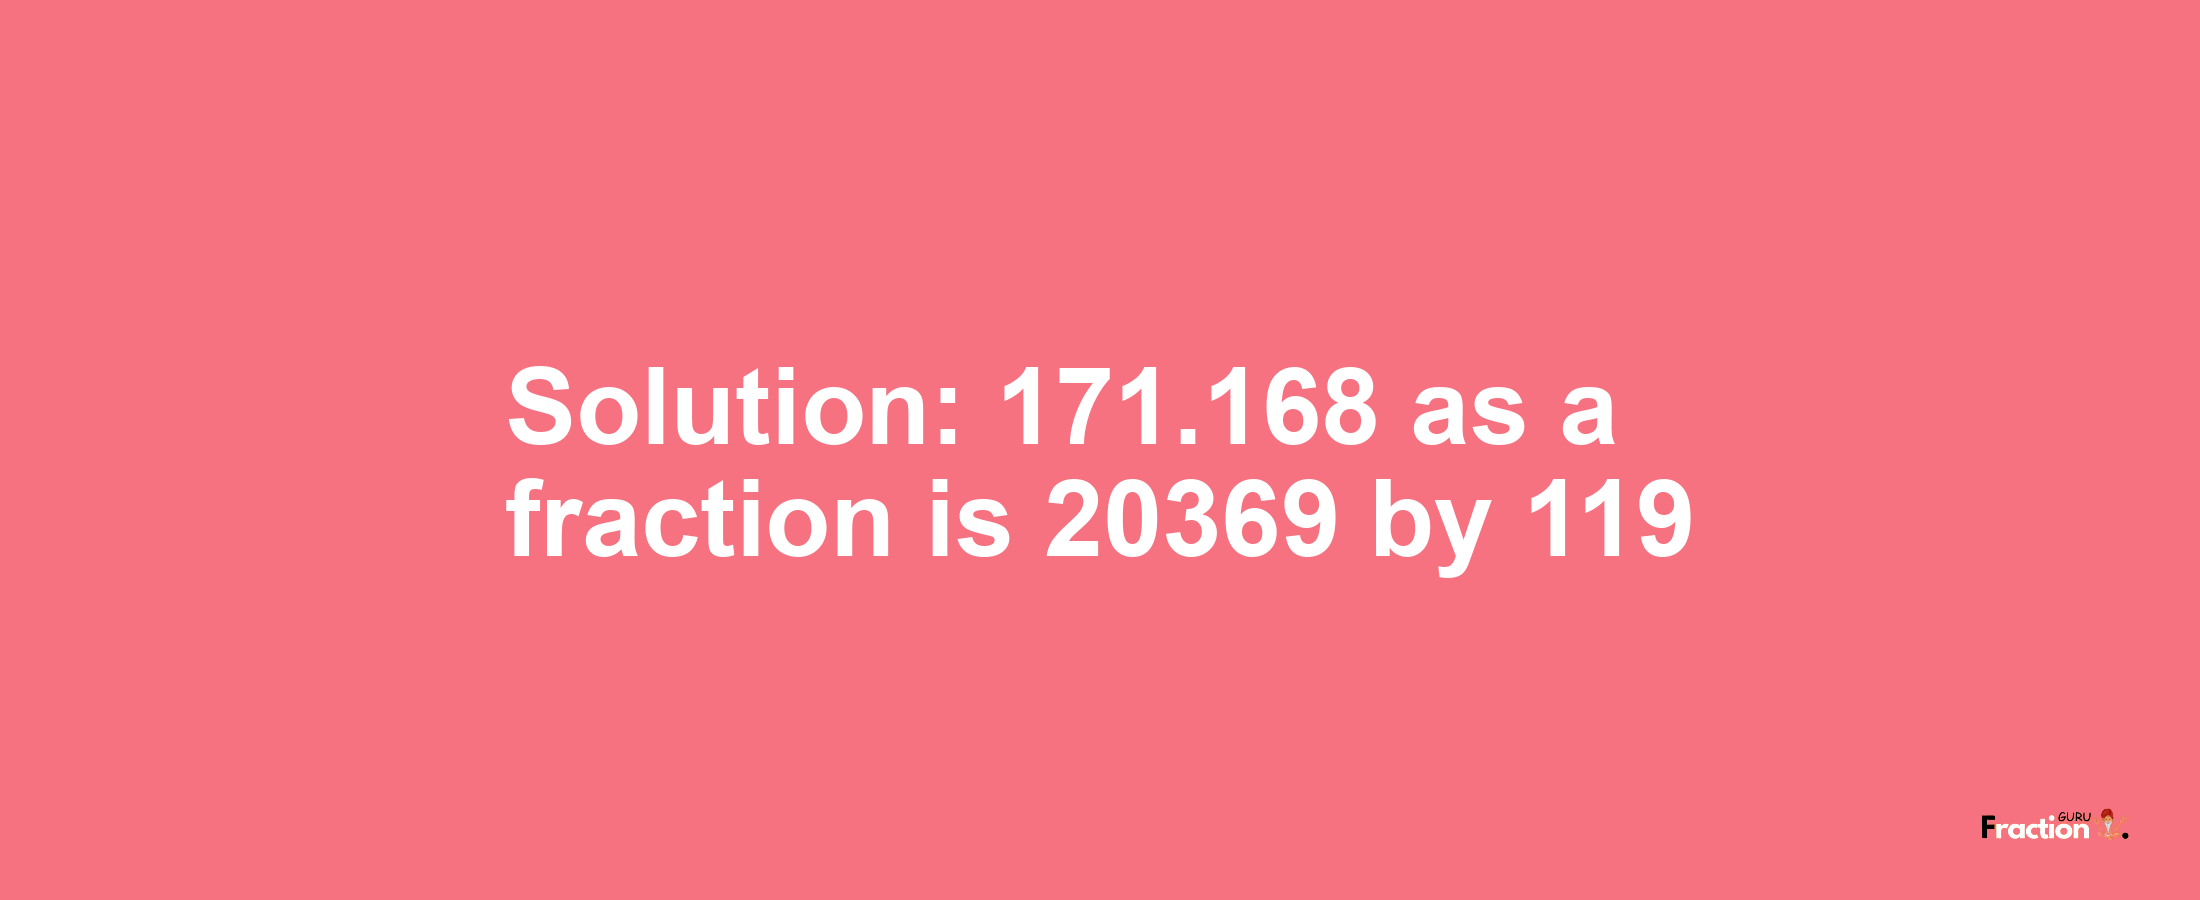 Solution:171.168 as a fraction is 20369/119